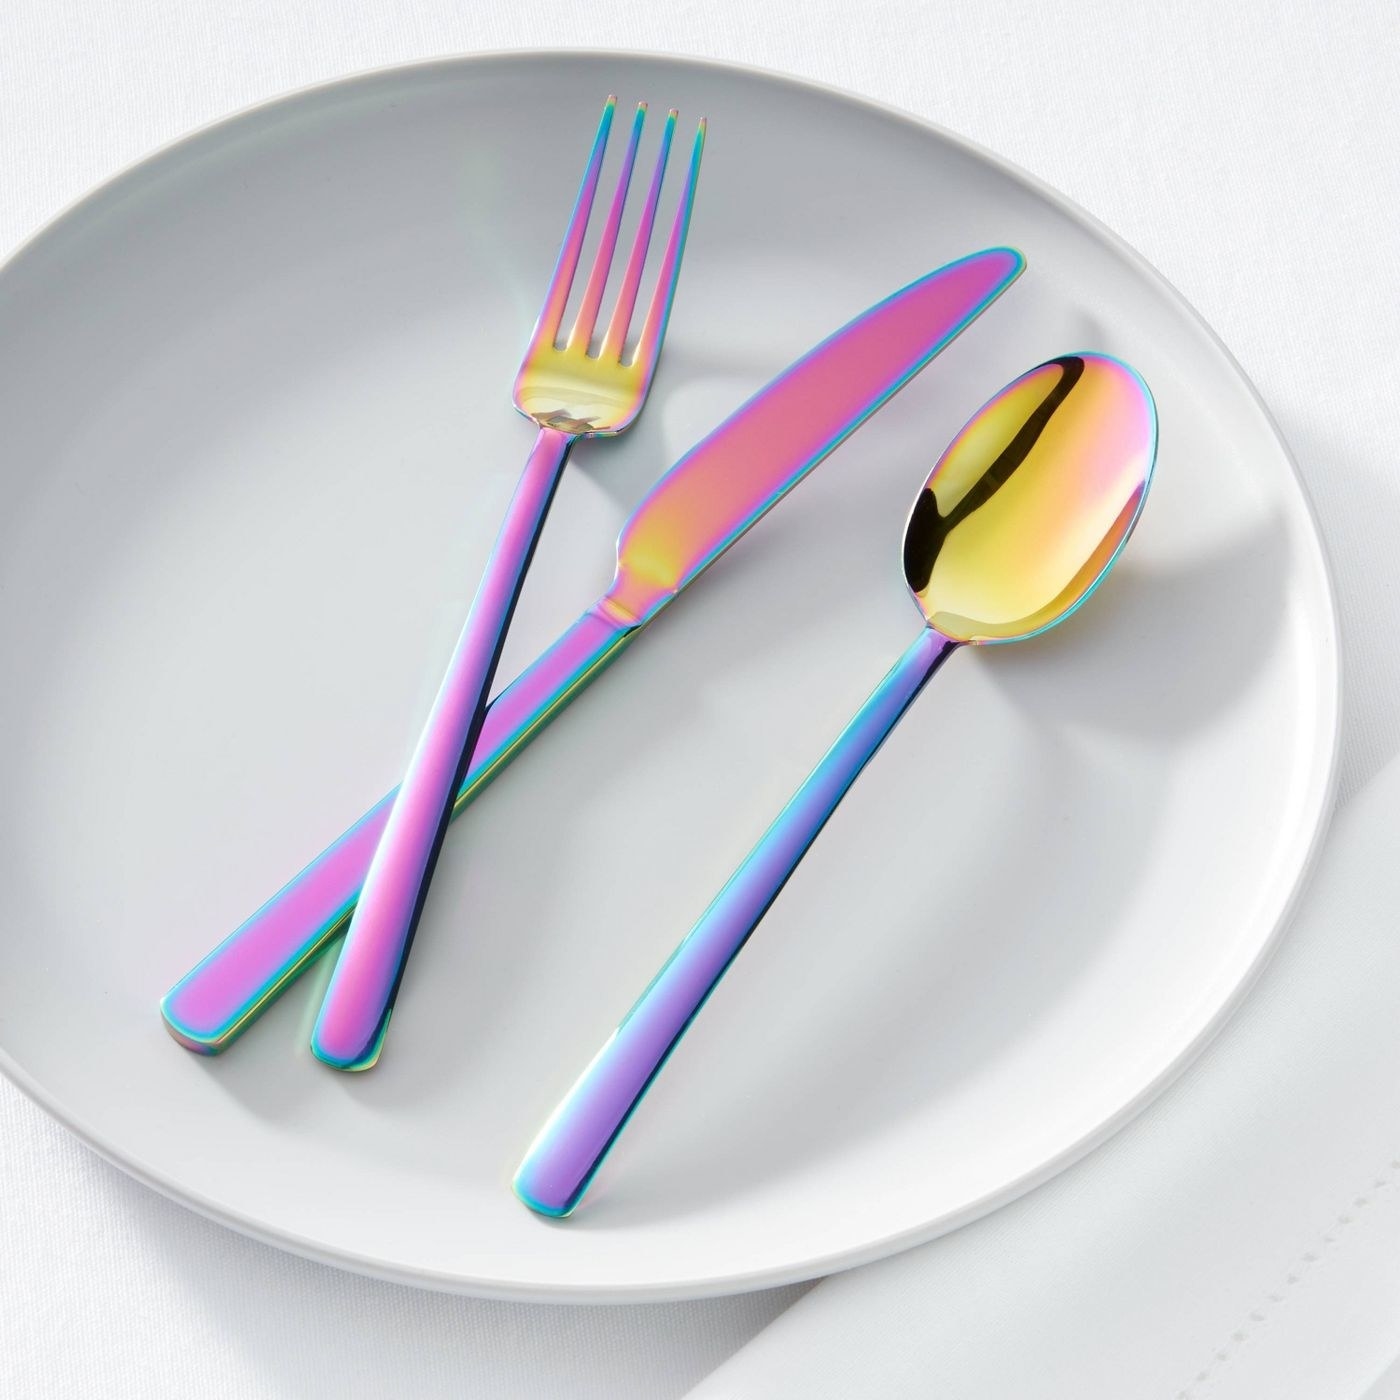 A fork, knife and spoon in an iridescent finish sitting on a white plate